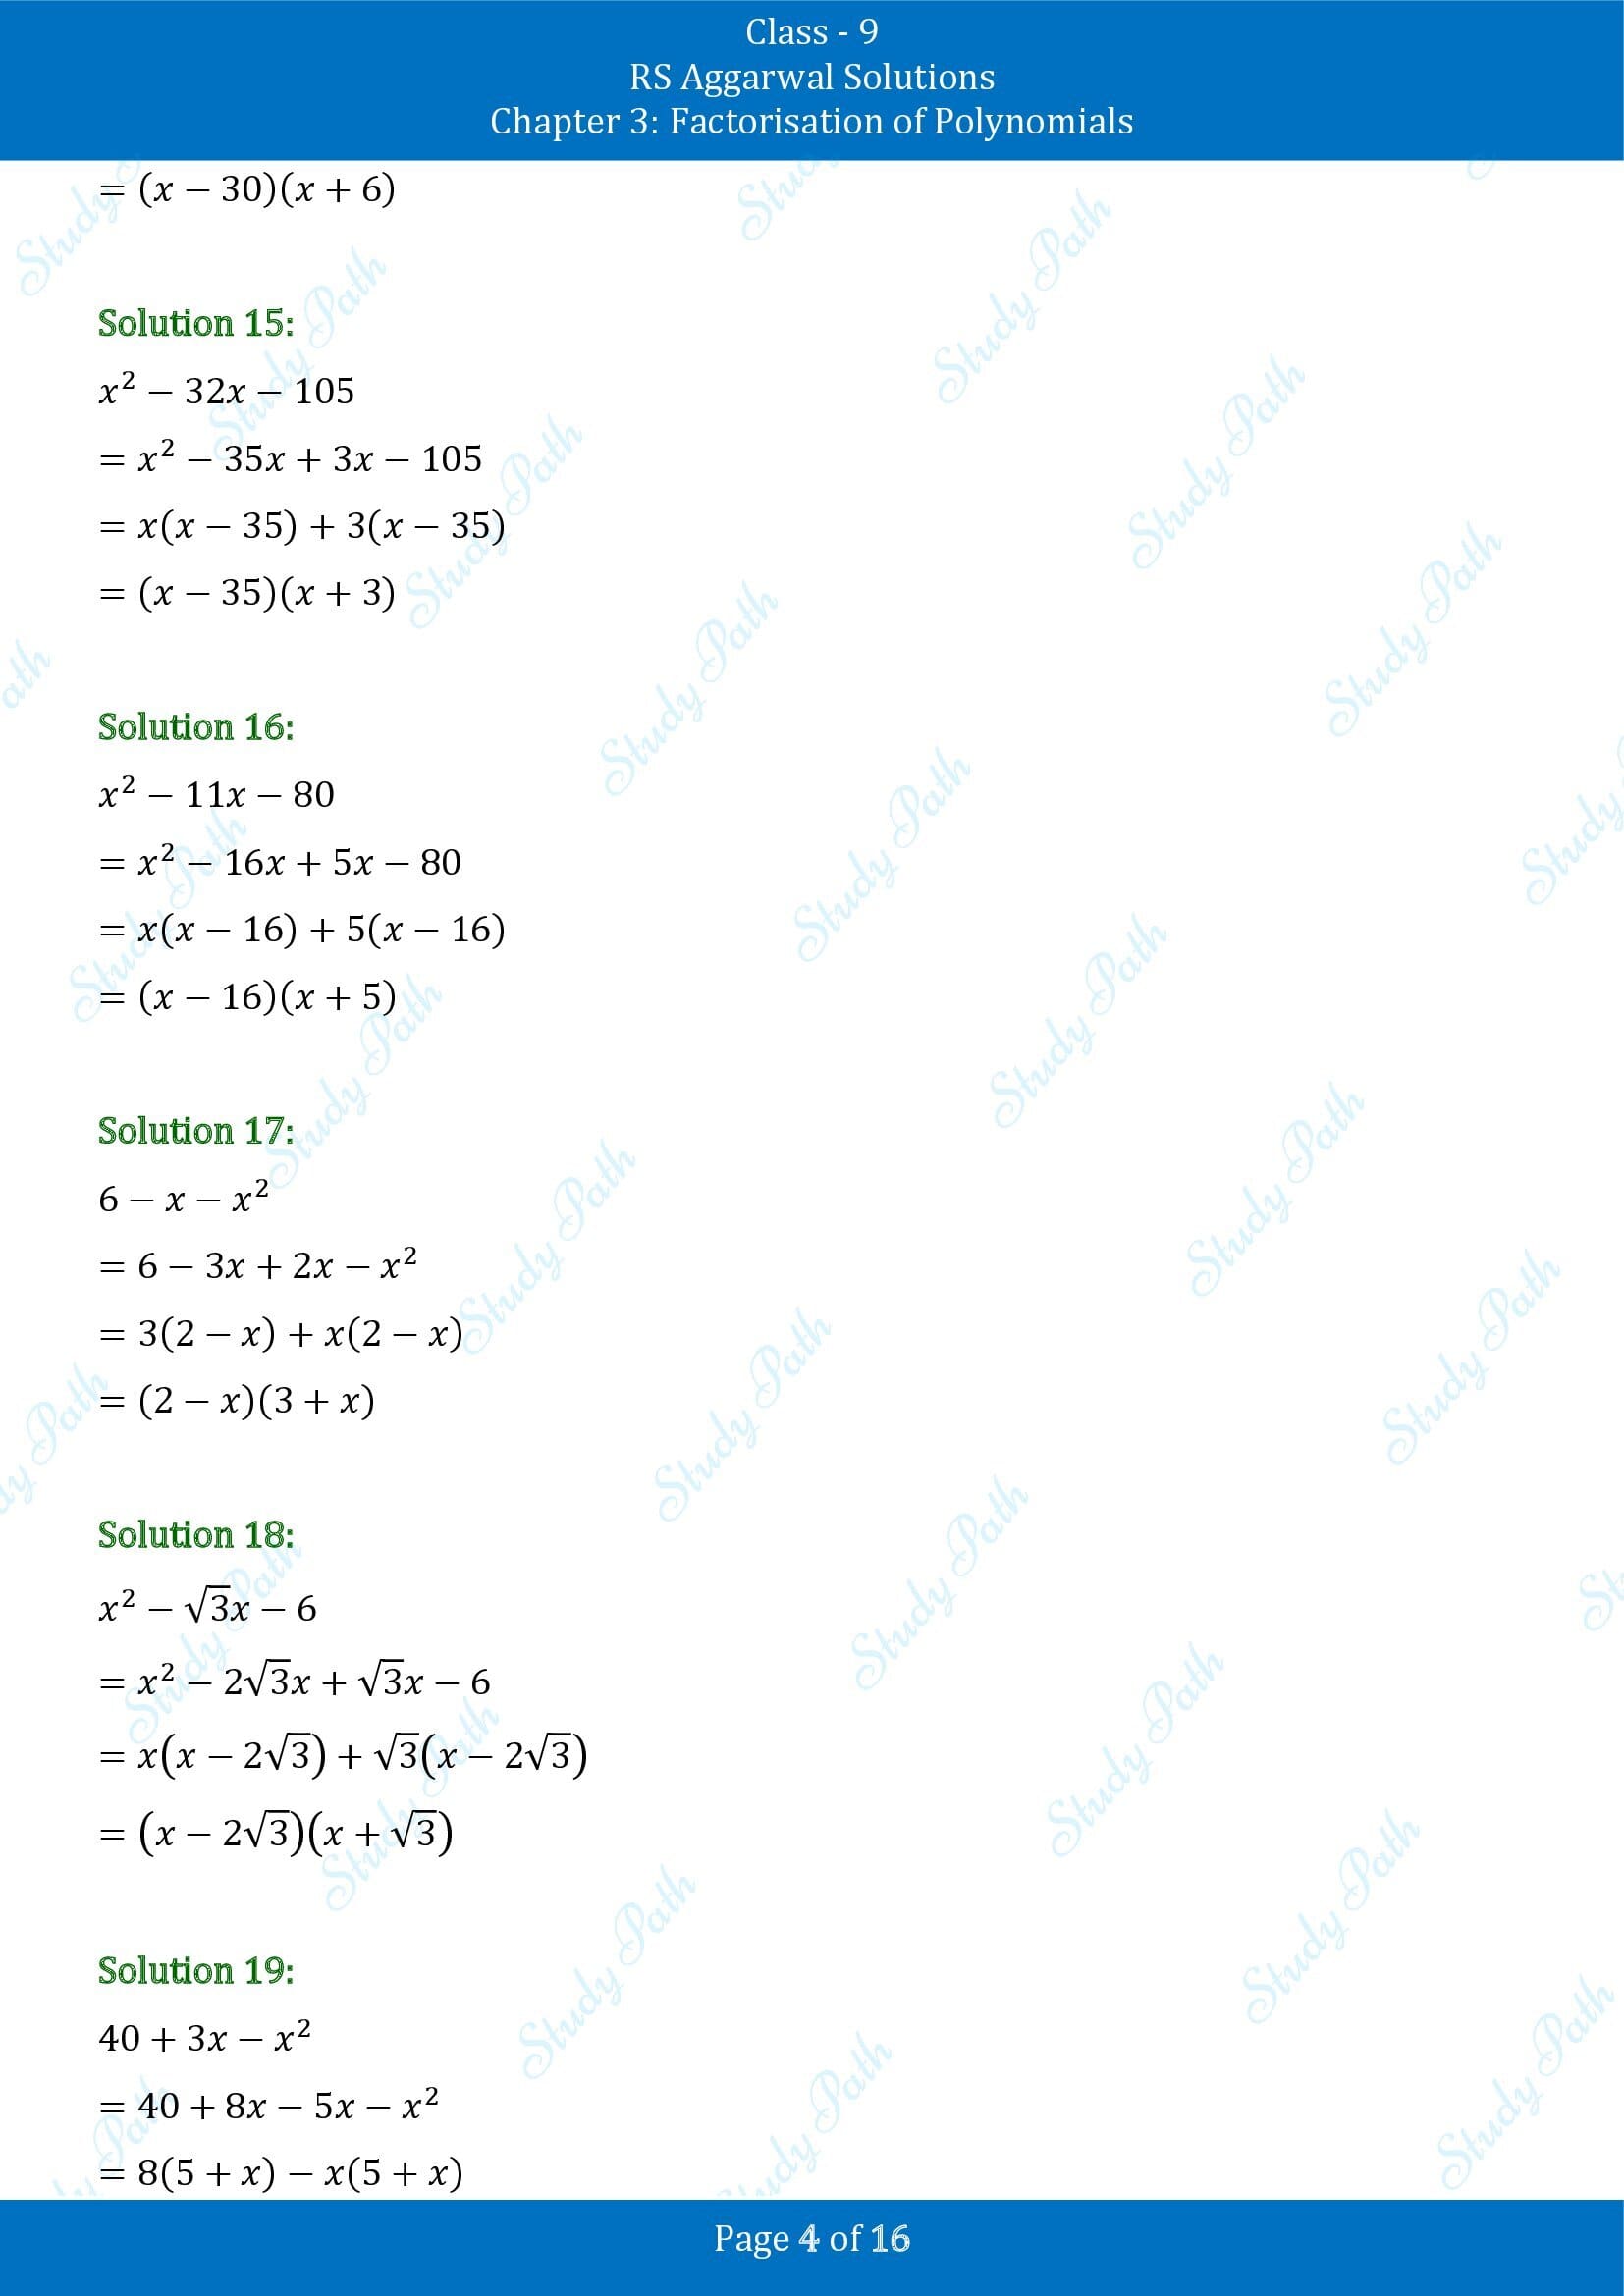 RS Aggarwal Solutions Class 9 Chapter 3 Factorisation of Polynomials Exercise 3C 00004